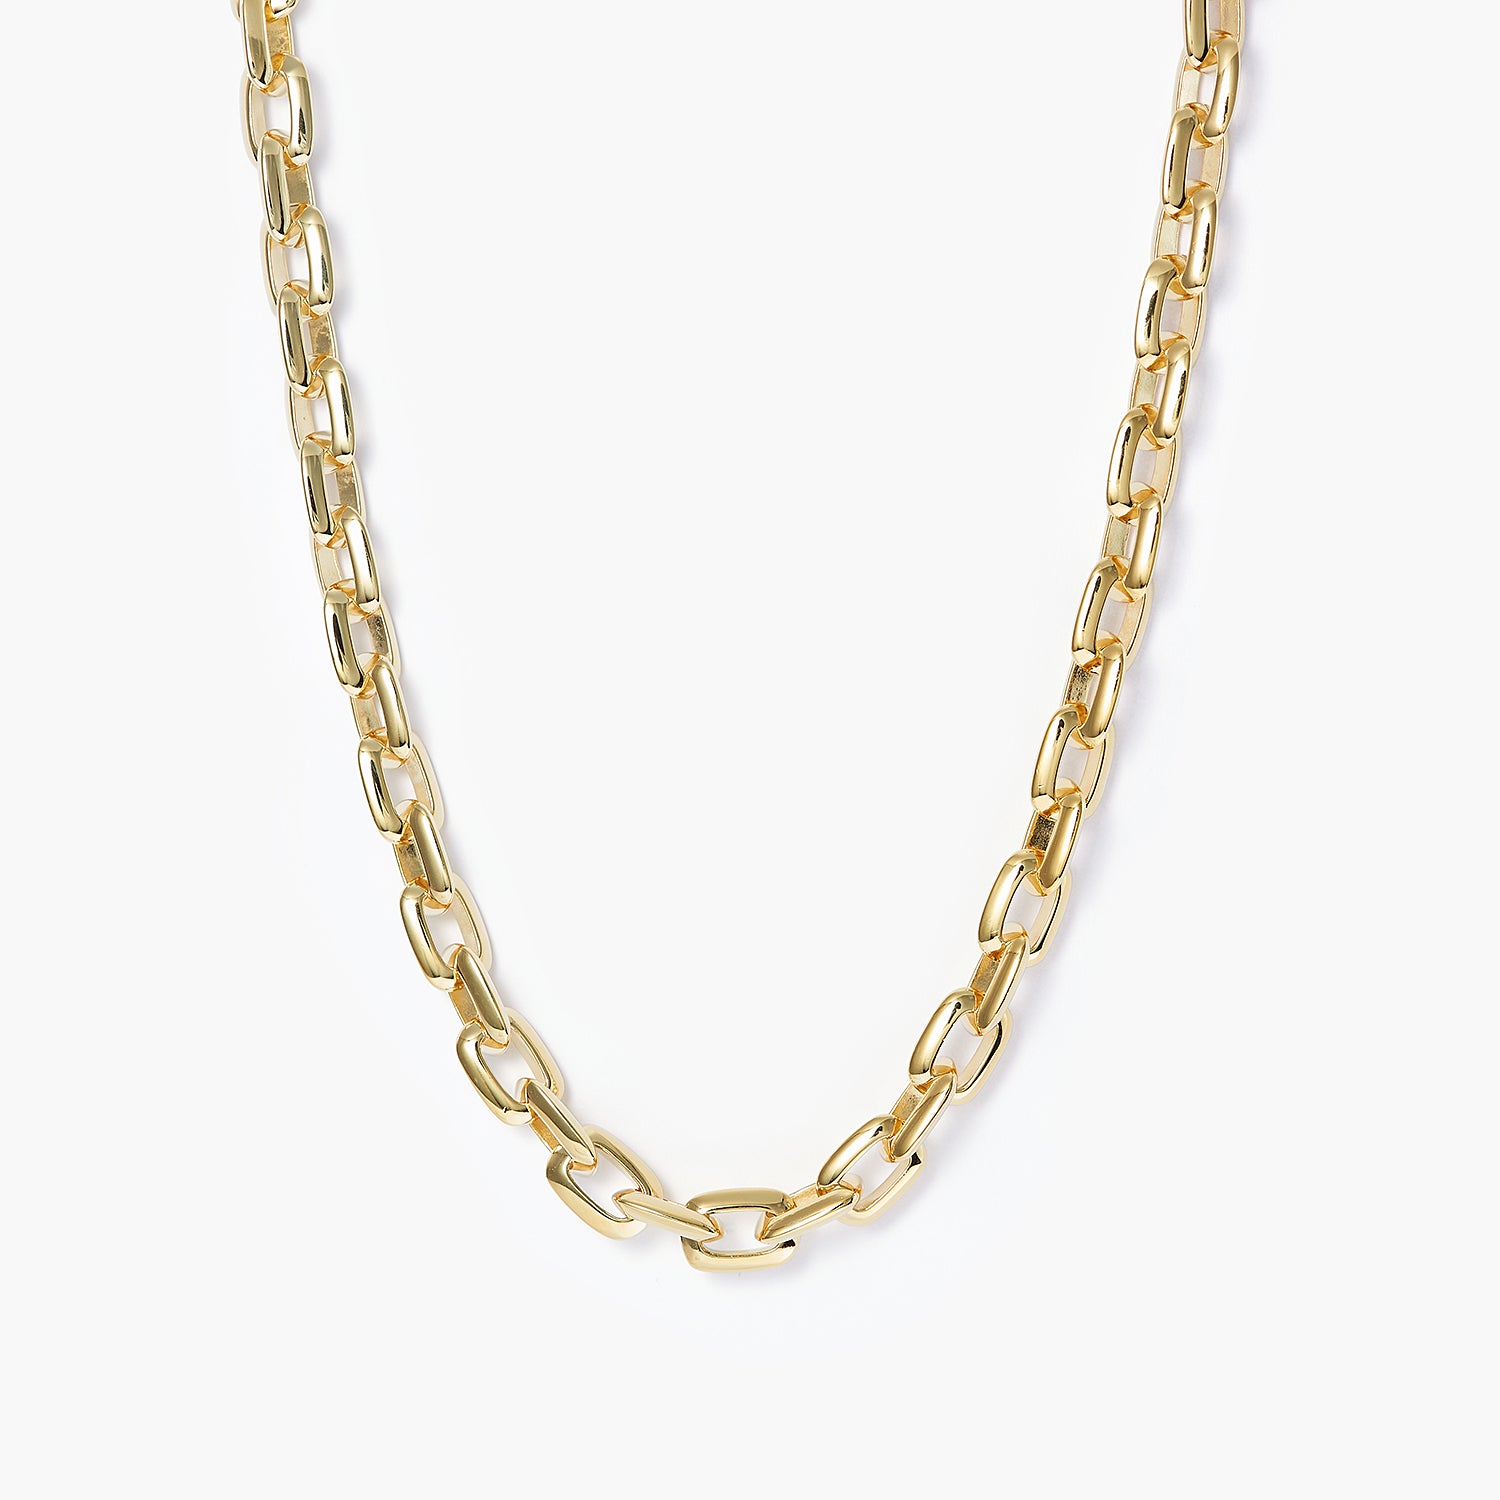 Beveled Square Chain Necklace